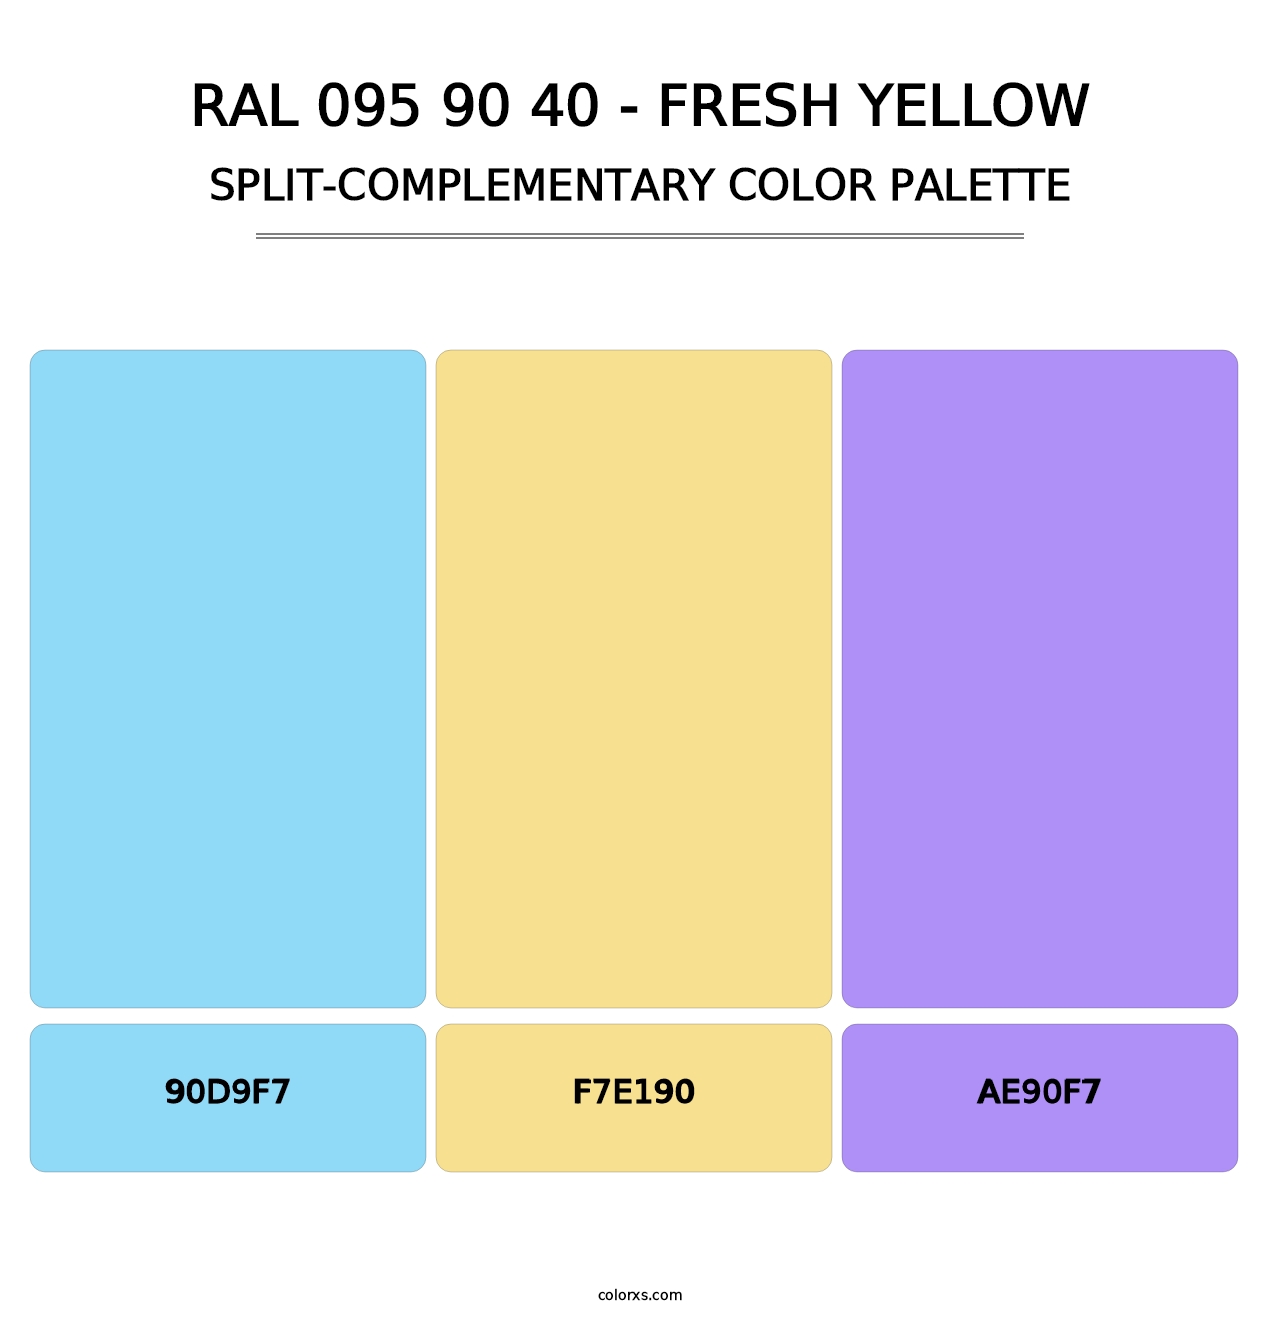 RAL 095 90 40 - Fresh Yellow - Split-Complementary Color Palette